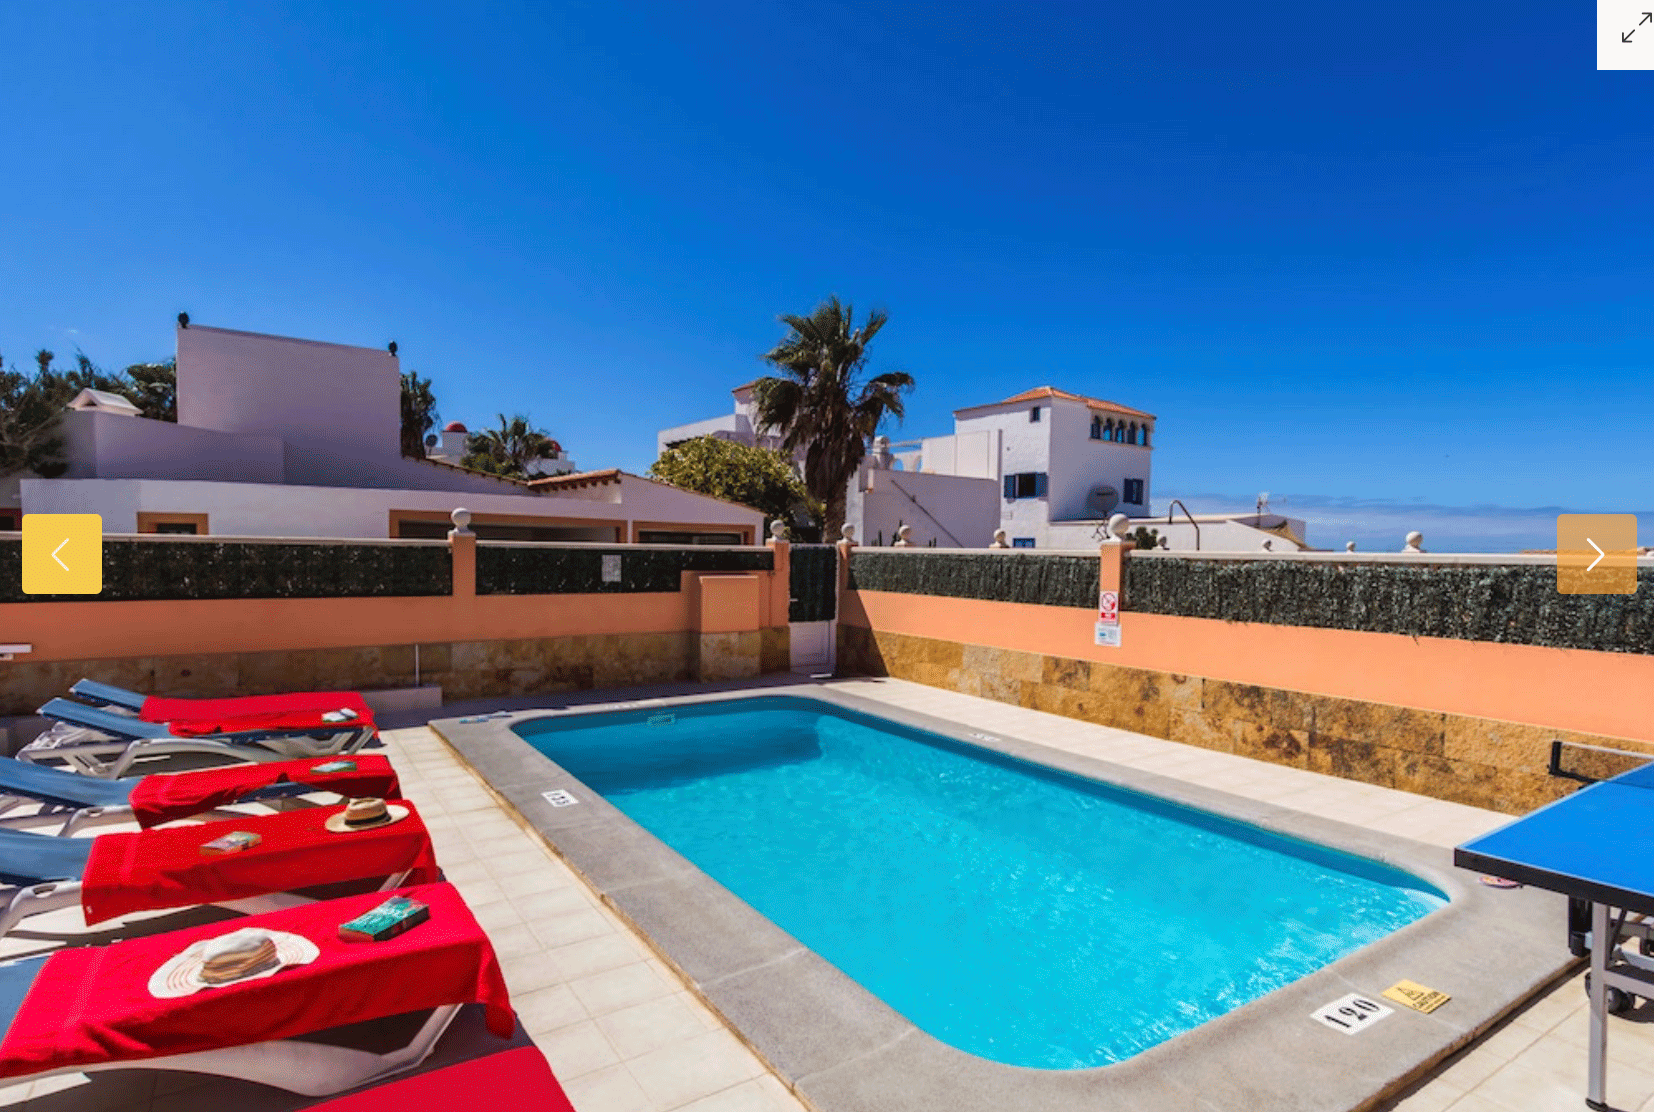 For sale! A fantastic seafront villa with pool in Corralejo